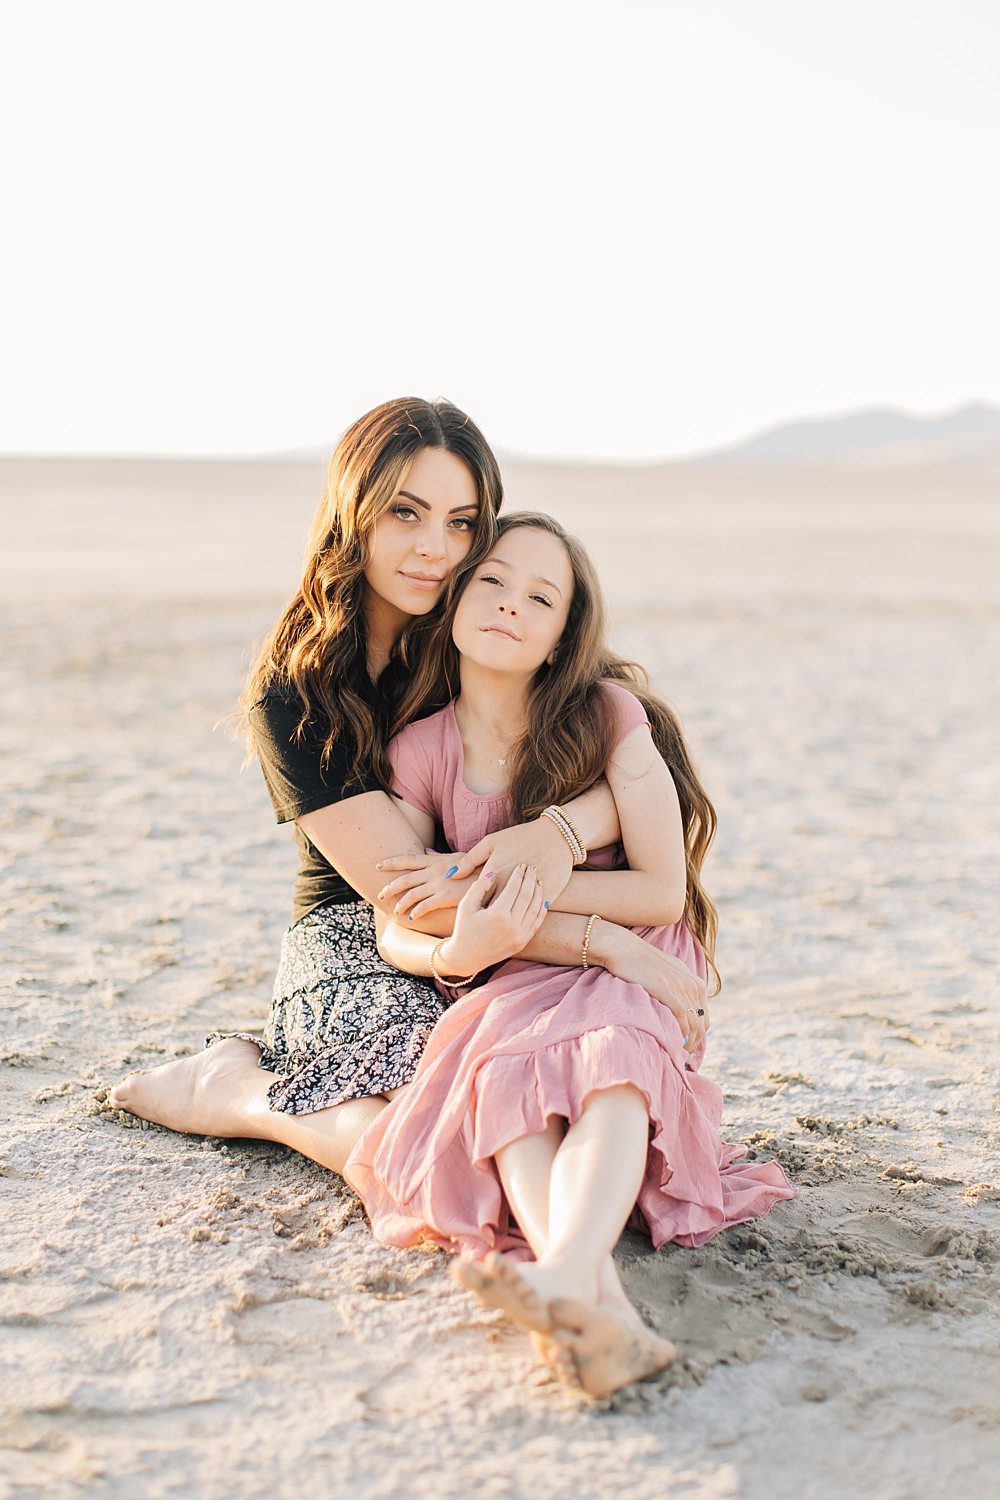 mother and daughter portraits - Google Search | Mother daughter photography  poses, Daughter photo ideas, Photography poses family